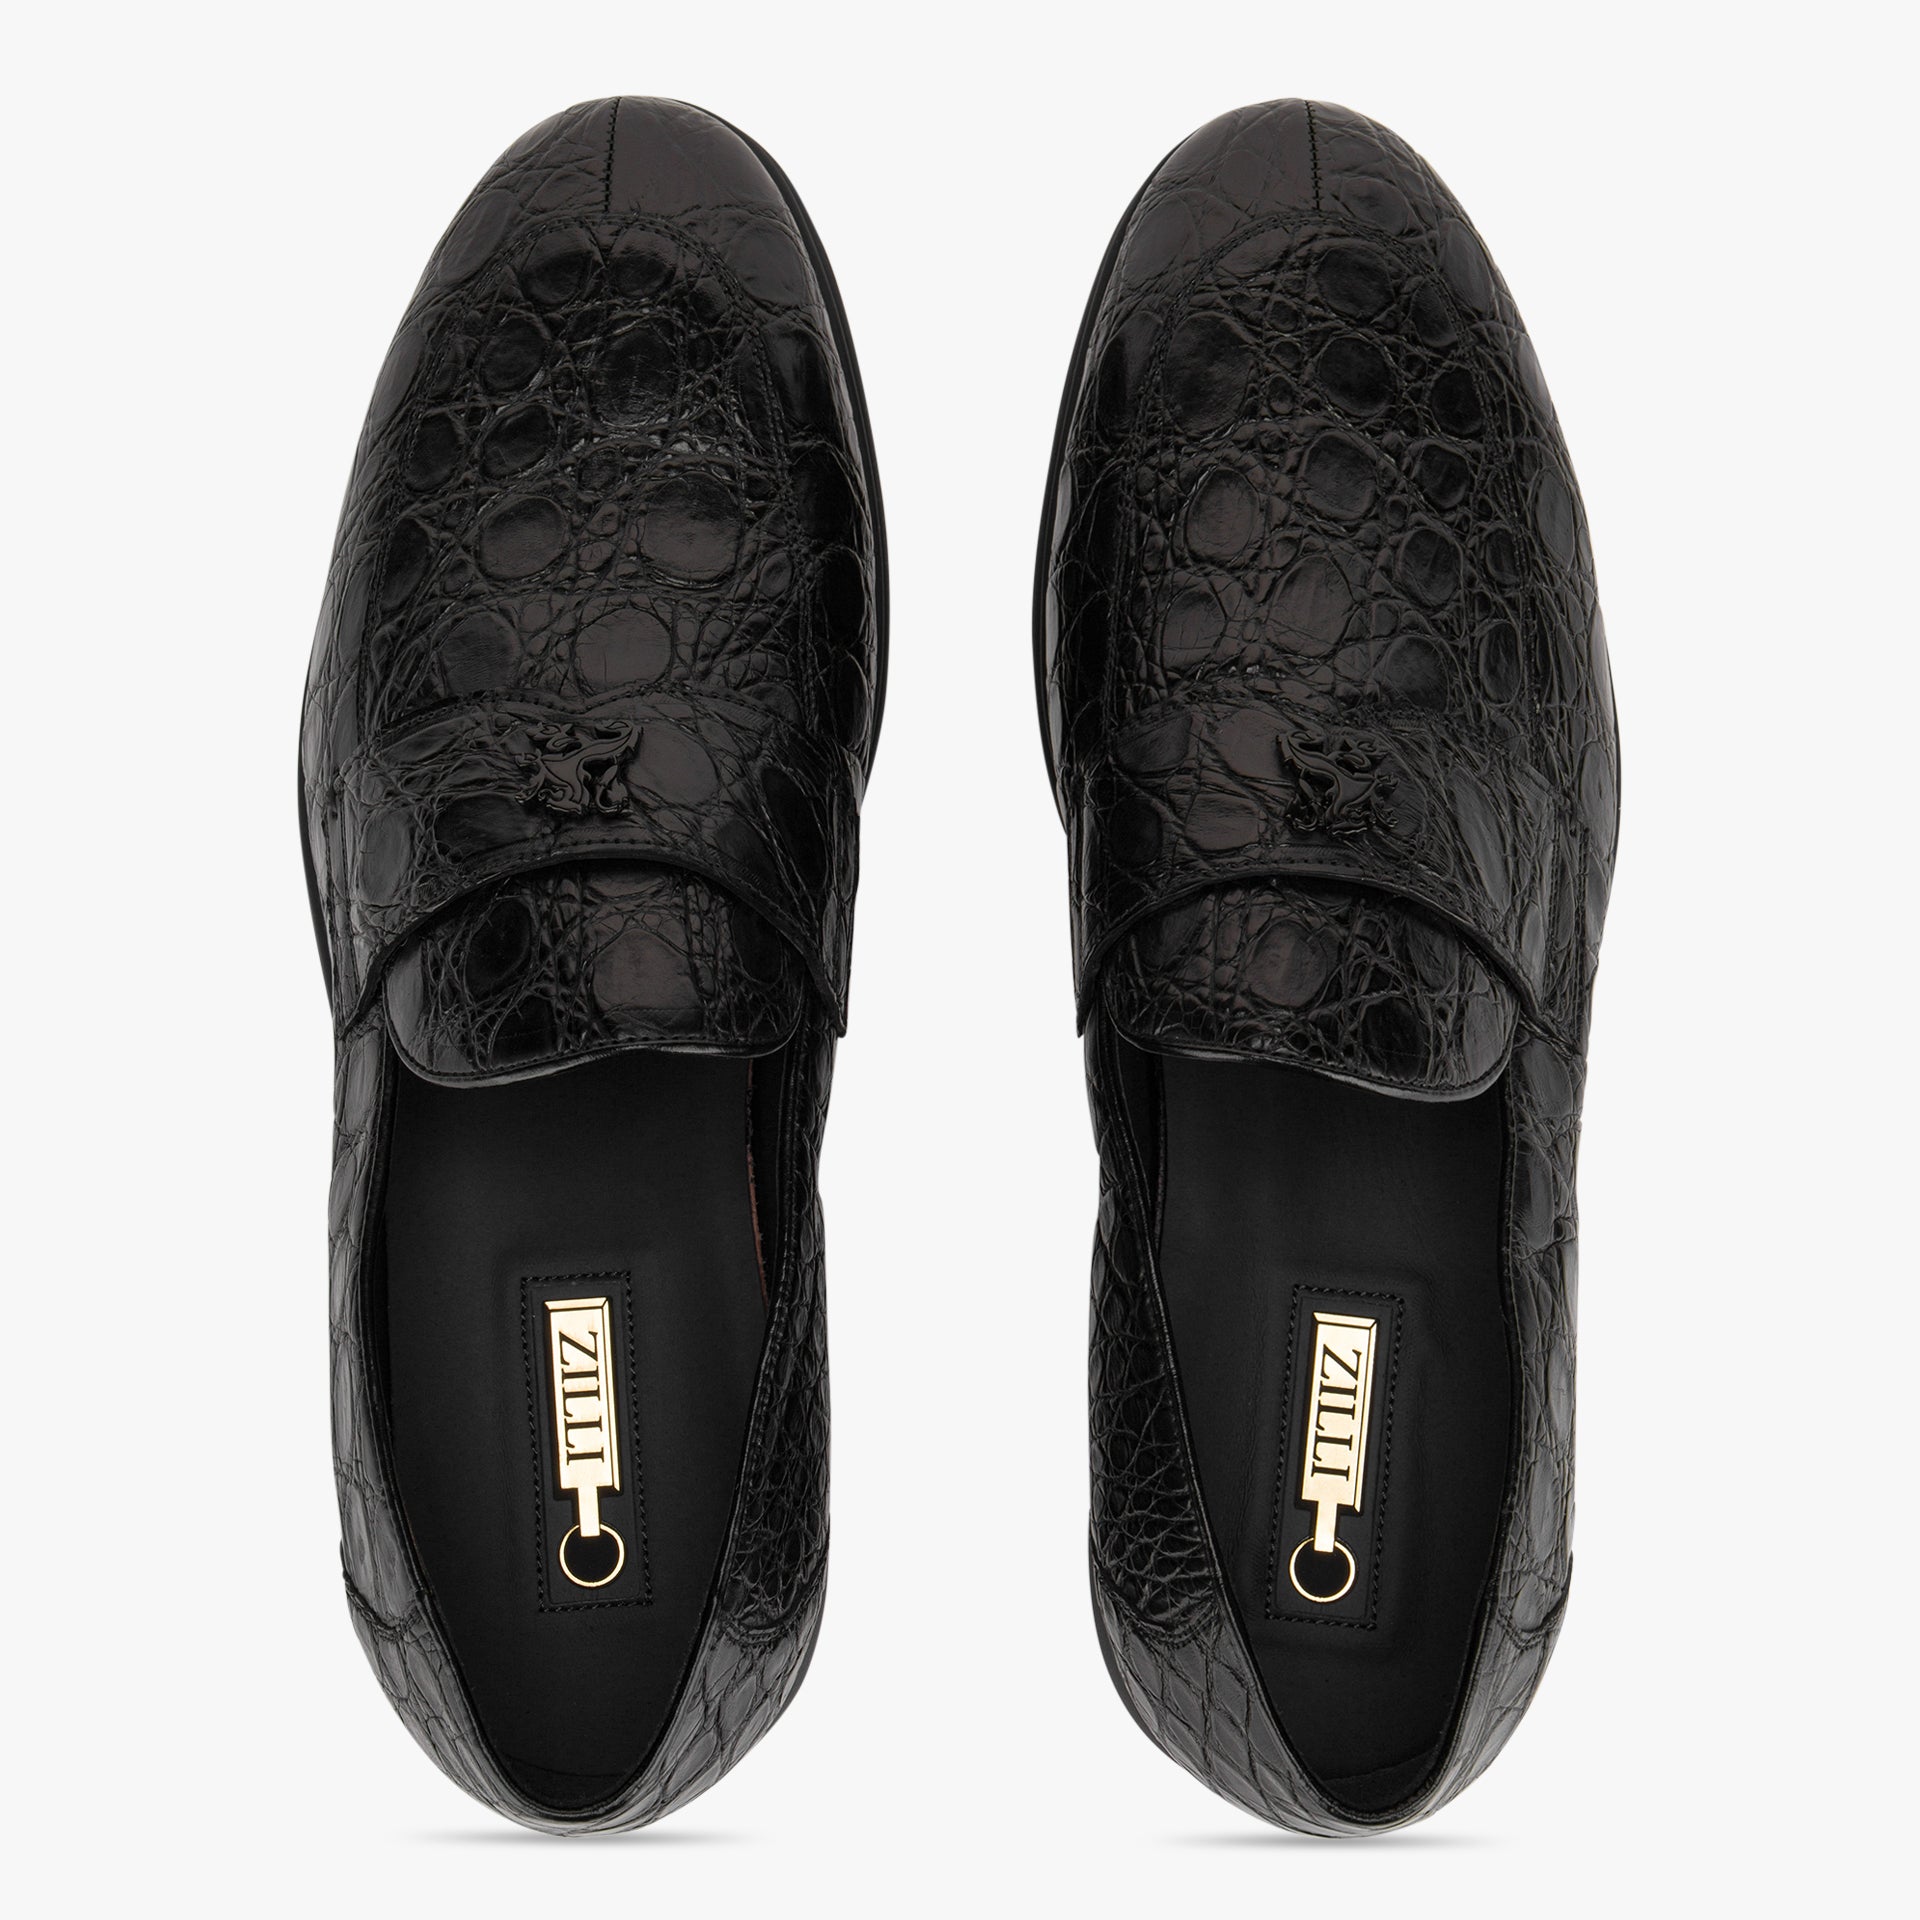 Caiman Loafers with Black Rubber Sole